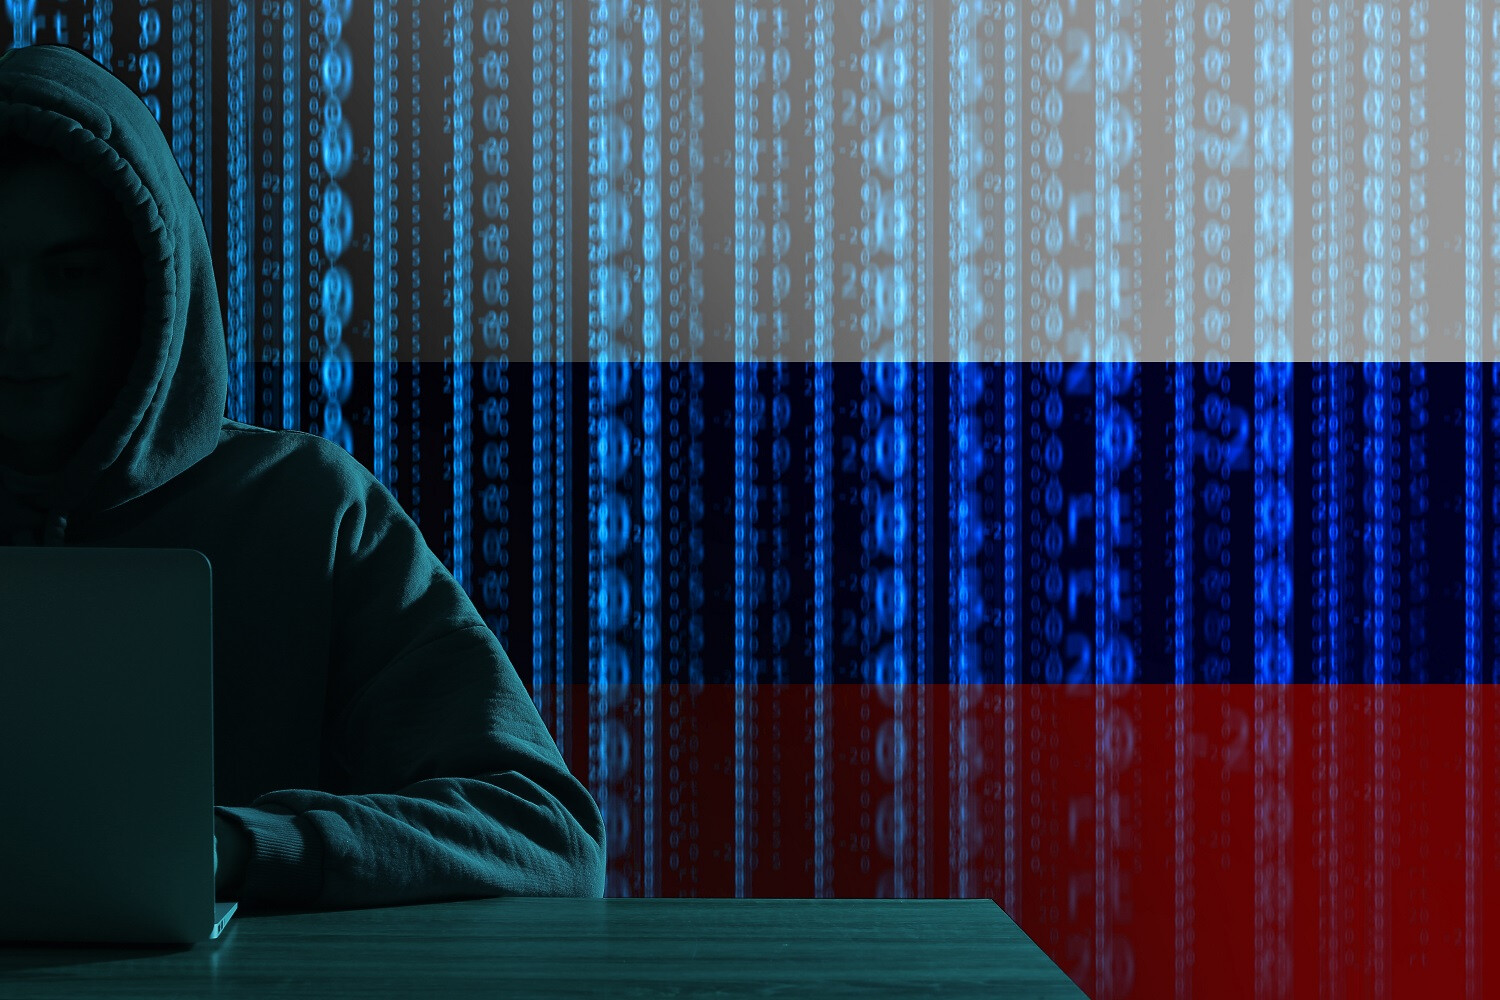 Research Firm Elliptic Links FTX Hack to Russian Attackers